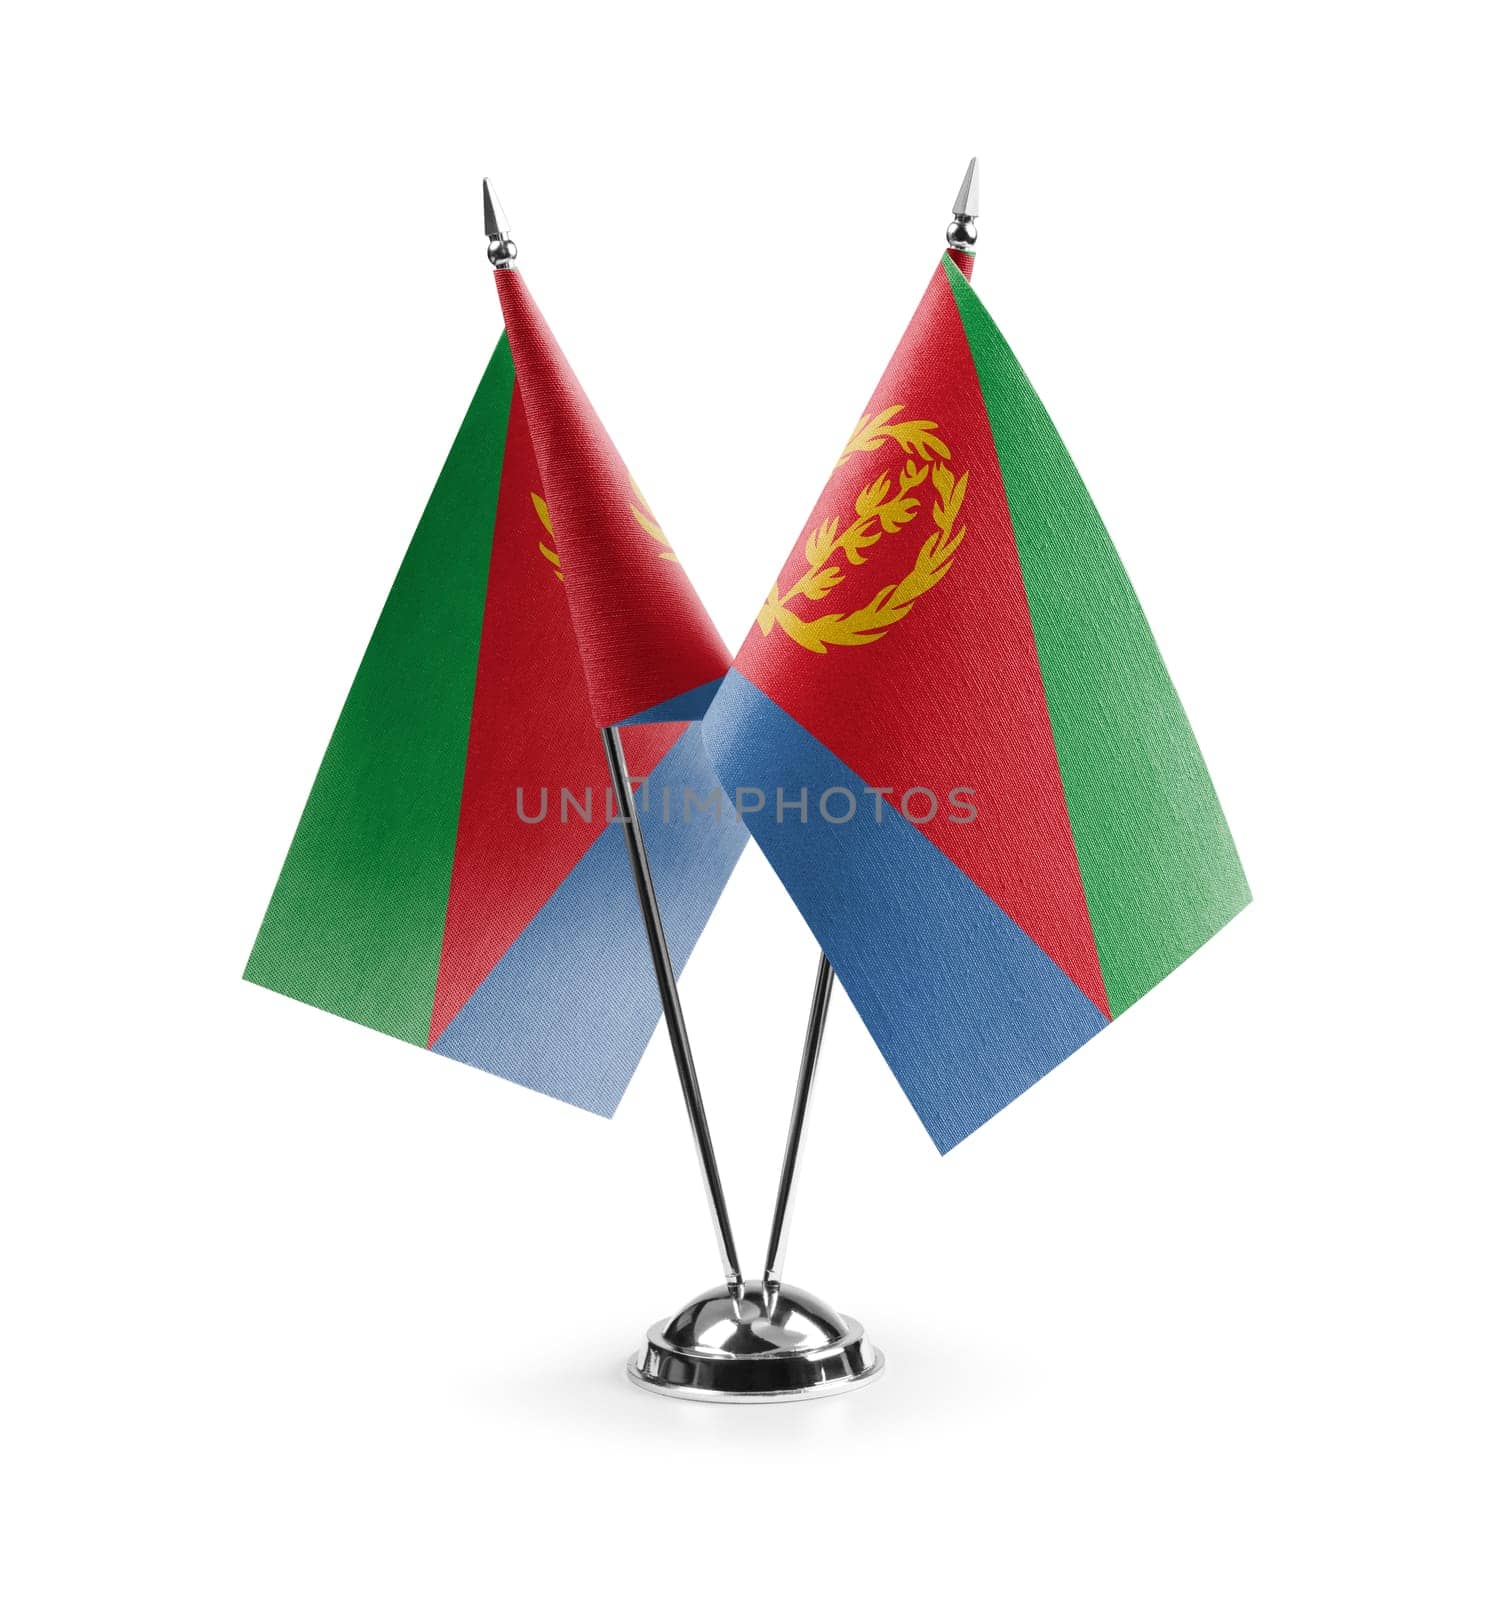 Small national flags of the Eritrea on a white background.